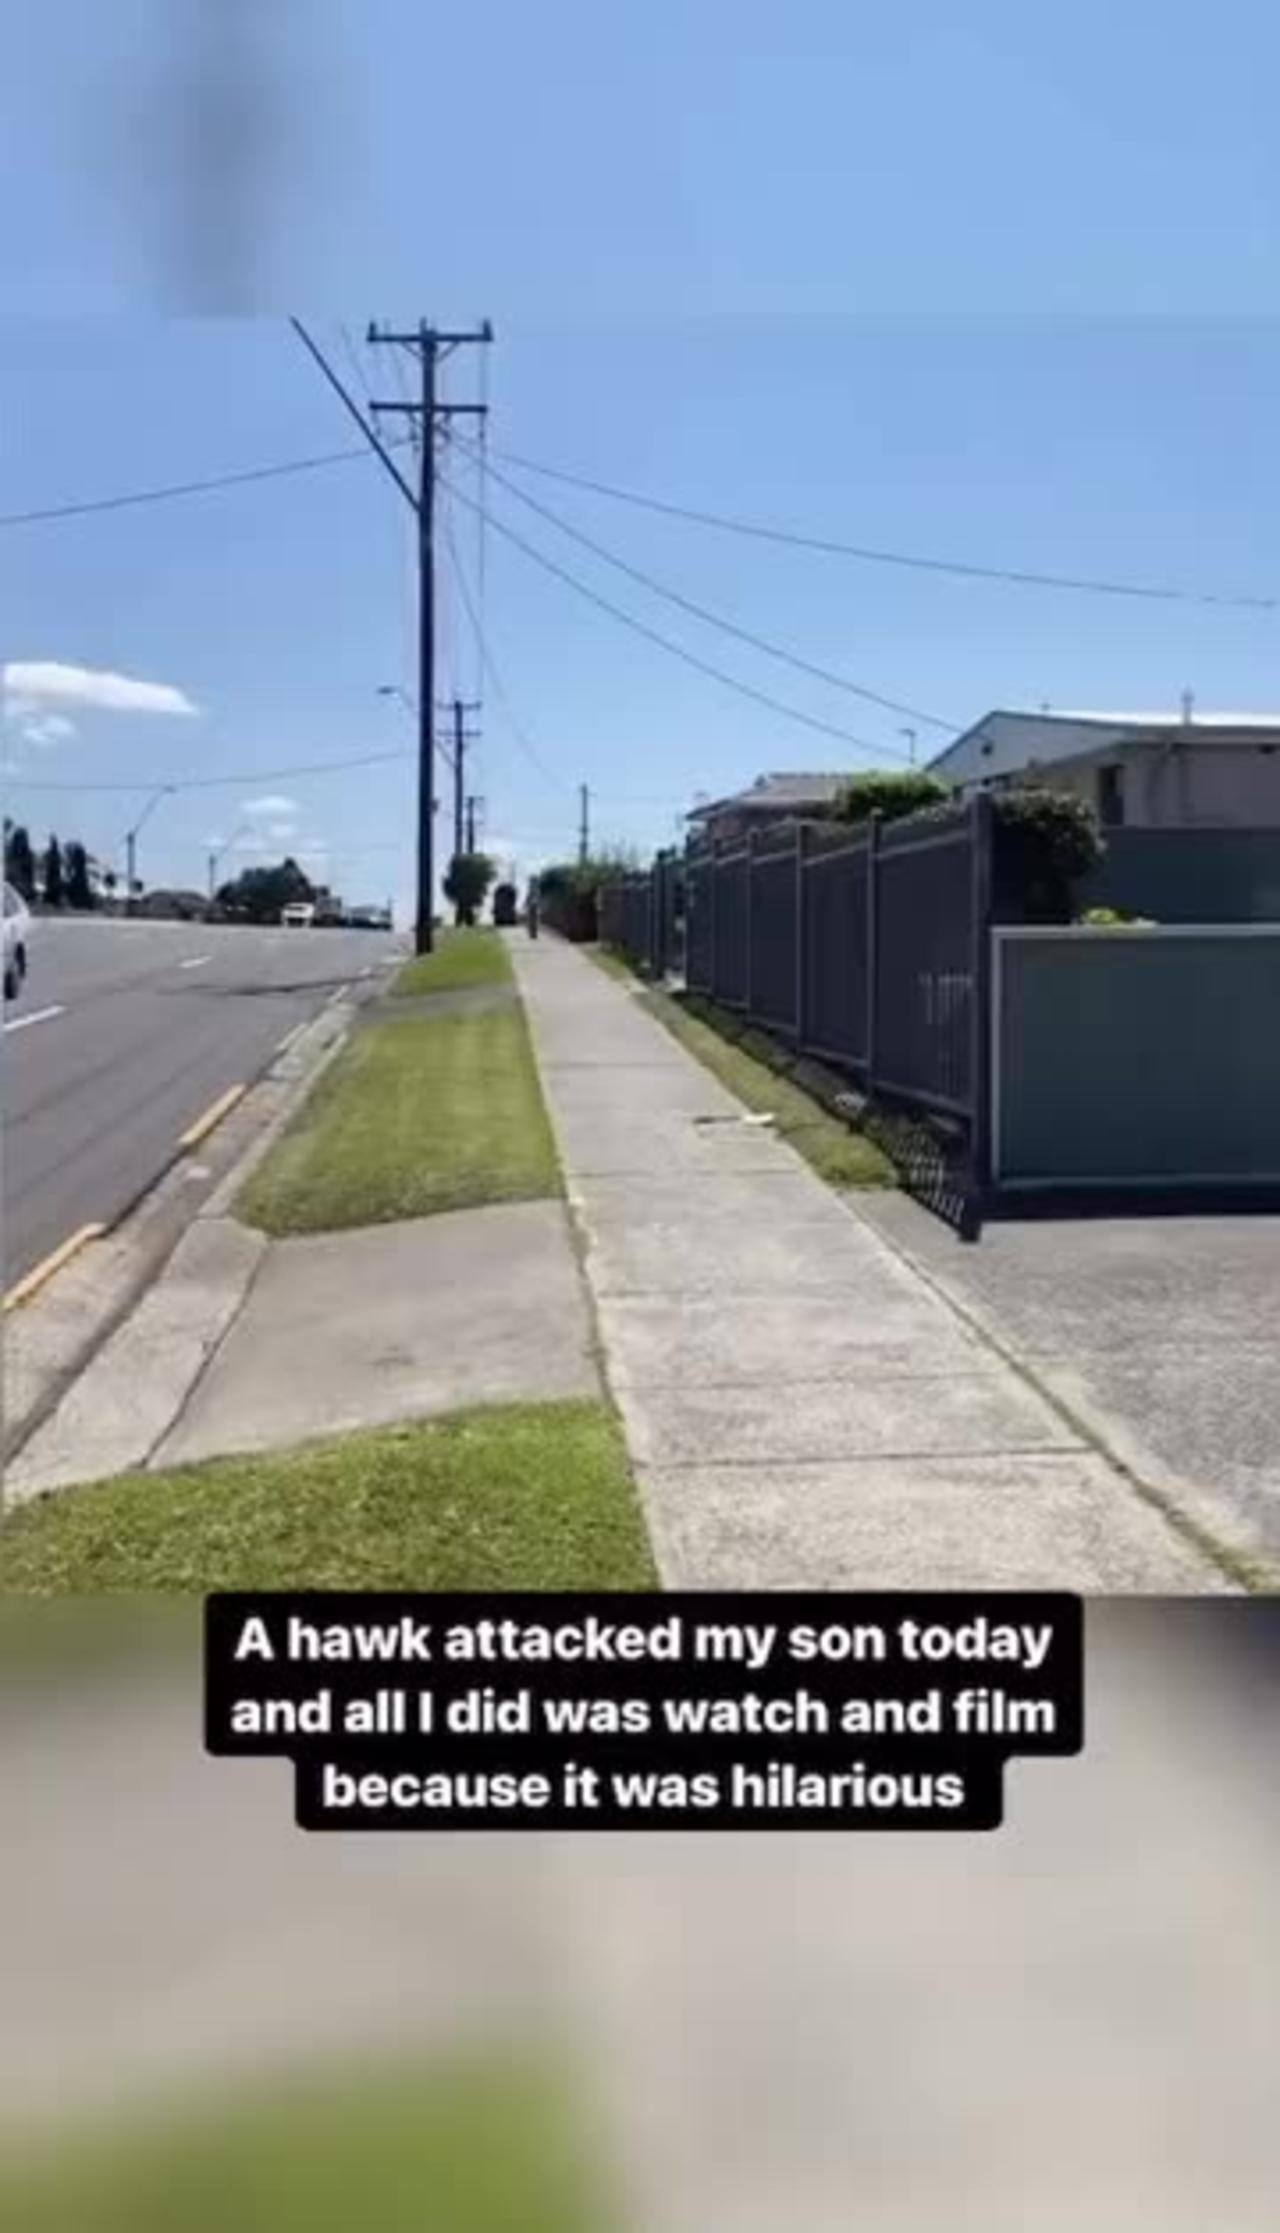 A hawk attacked my son today and all I did was watch and film because it was hilarious